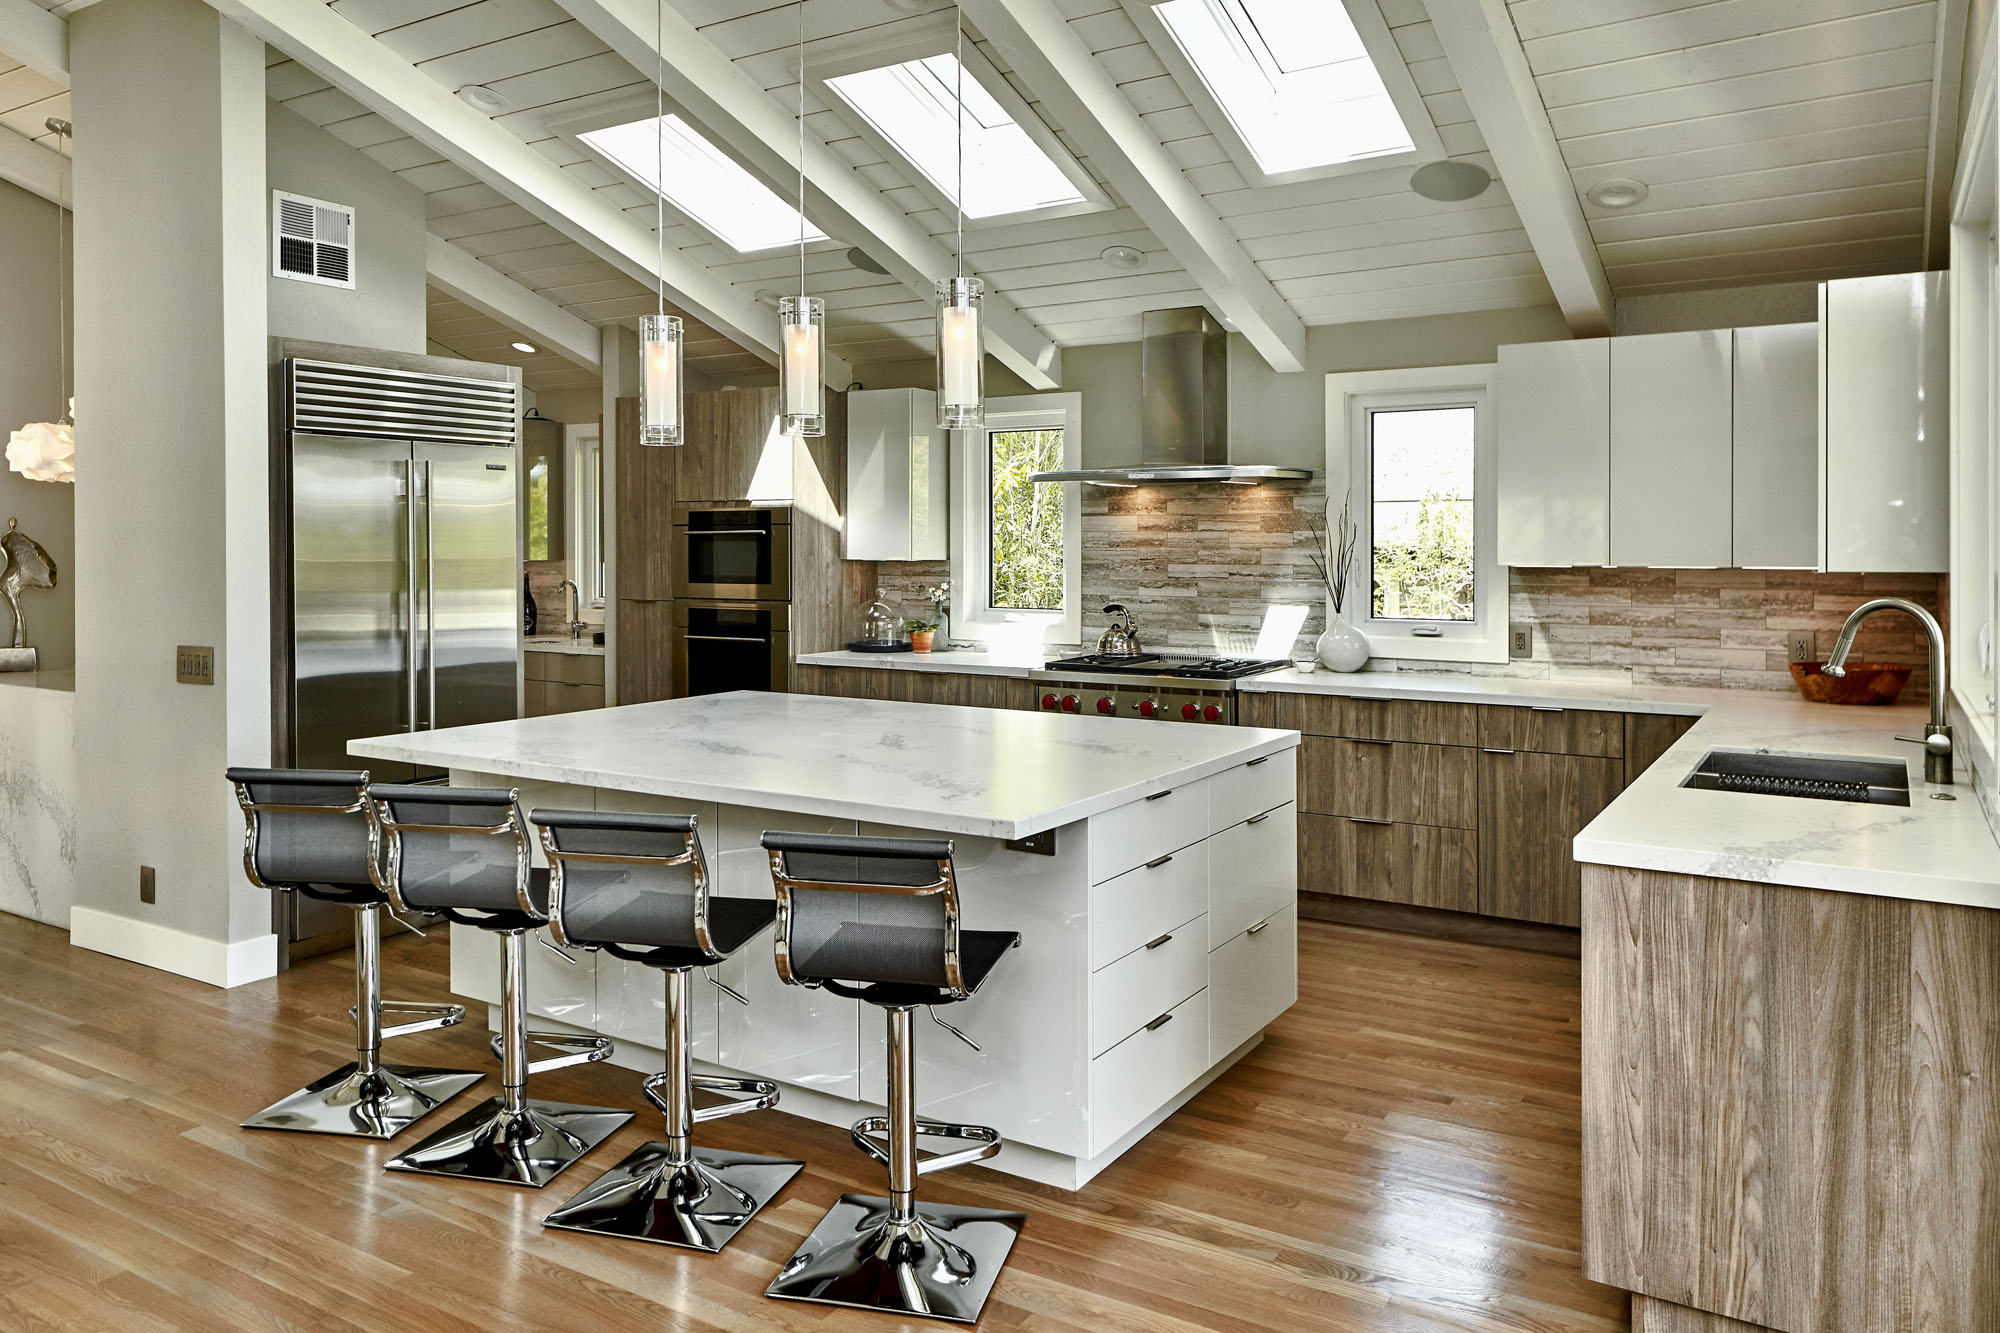 Modern Rustic Kitchen with White Gloss and Gray Cabinets - Crystal